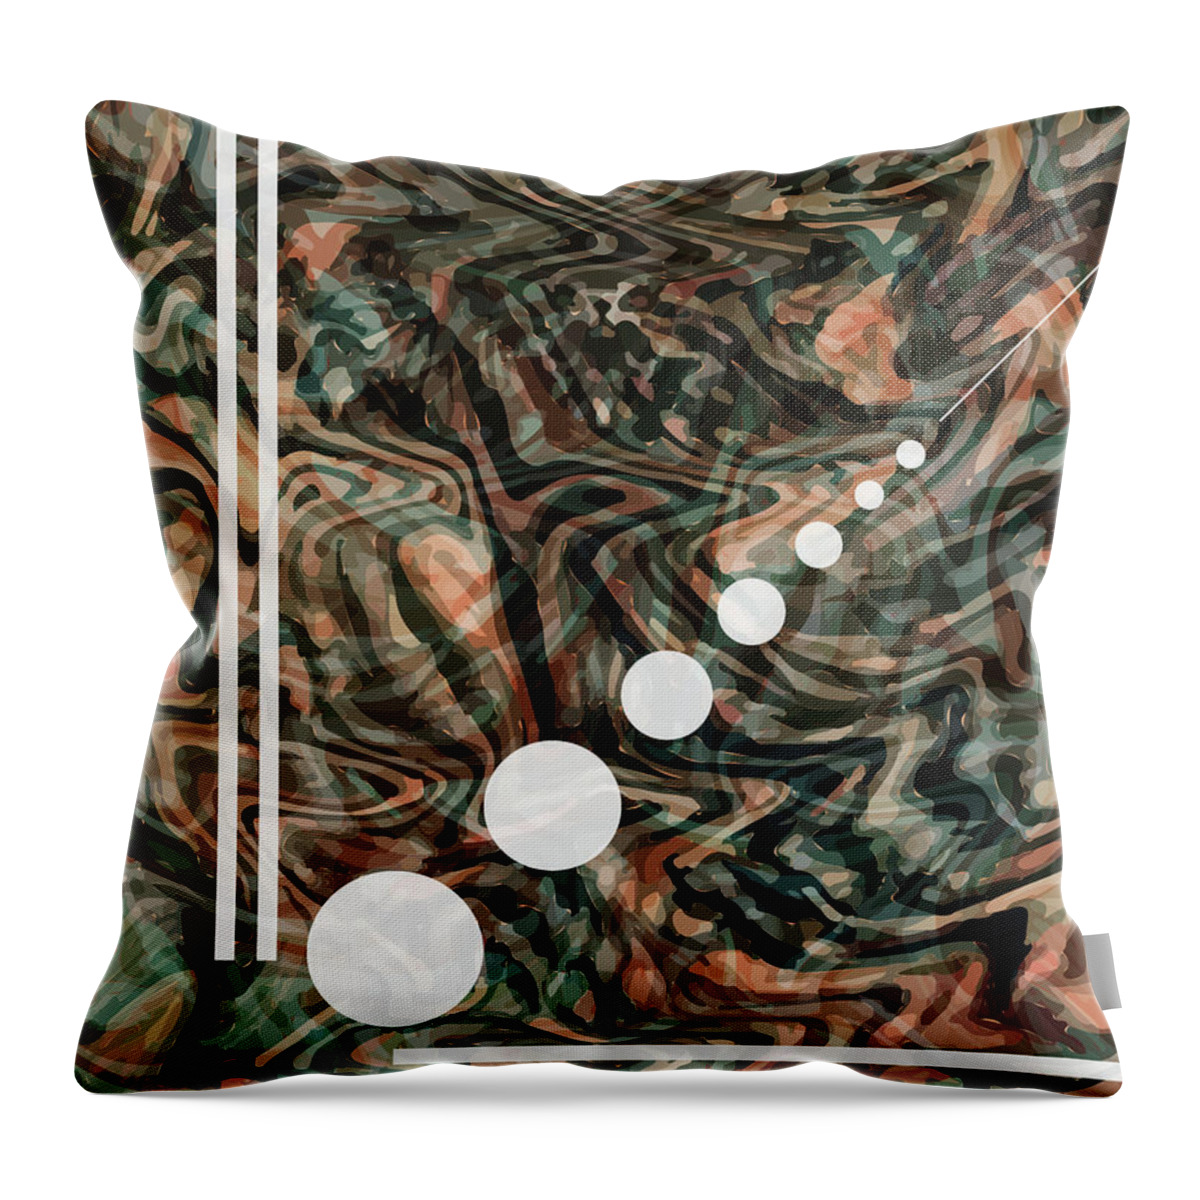 Abstract Throw Pillow featuring the mixed media Abstract Painting - Flow 1 - Fluid Painting - Brown, Black Abstract - Geometric Abstract - Marbling by Studio Grafiikka